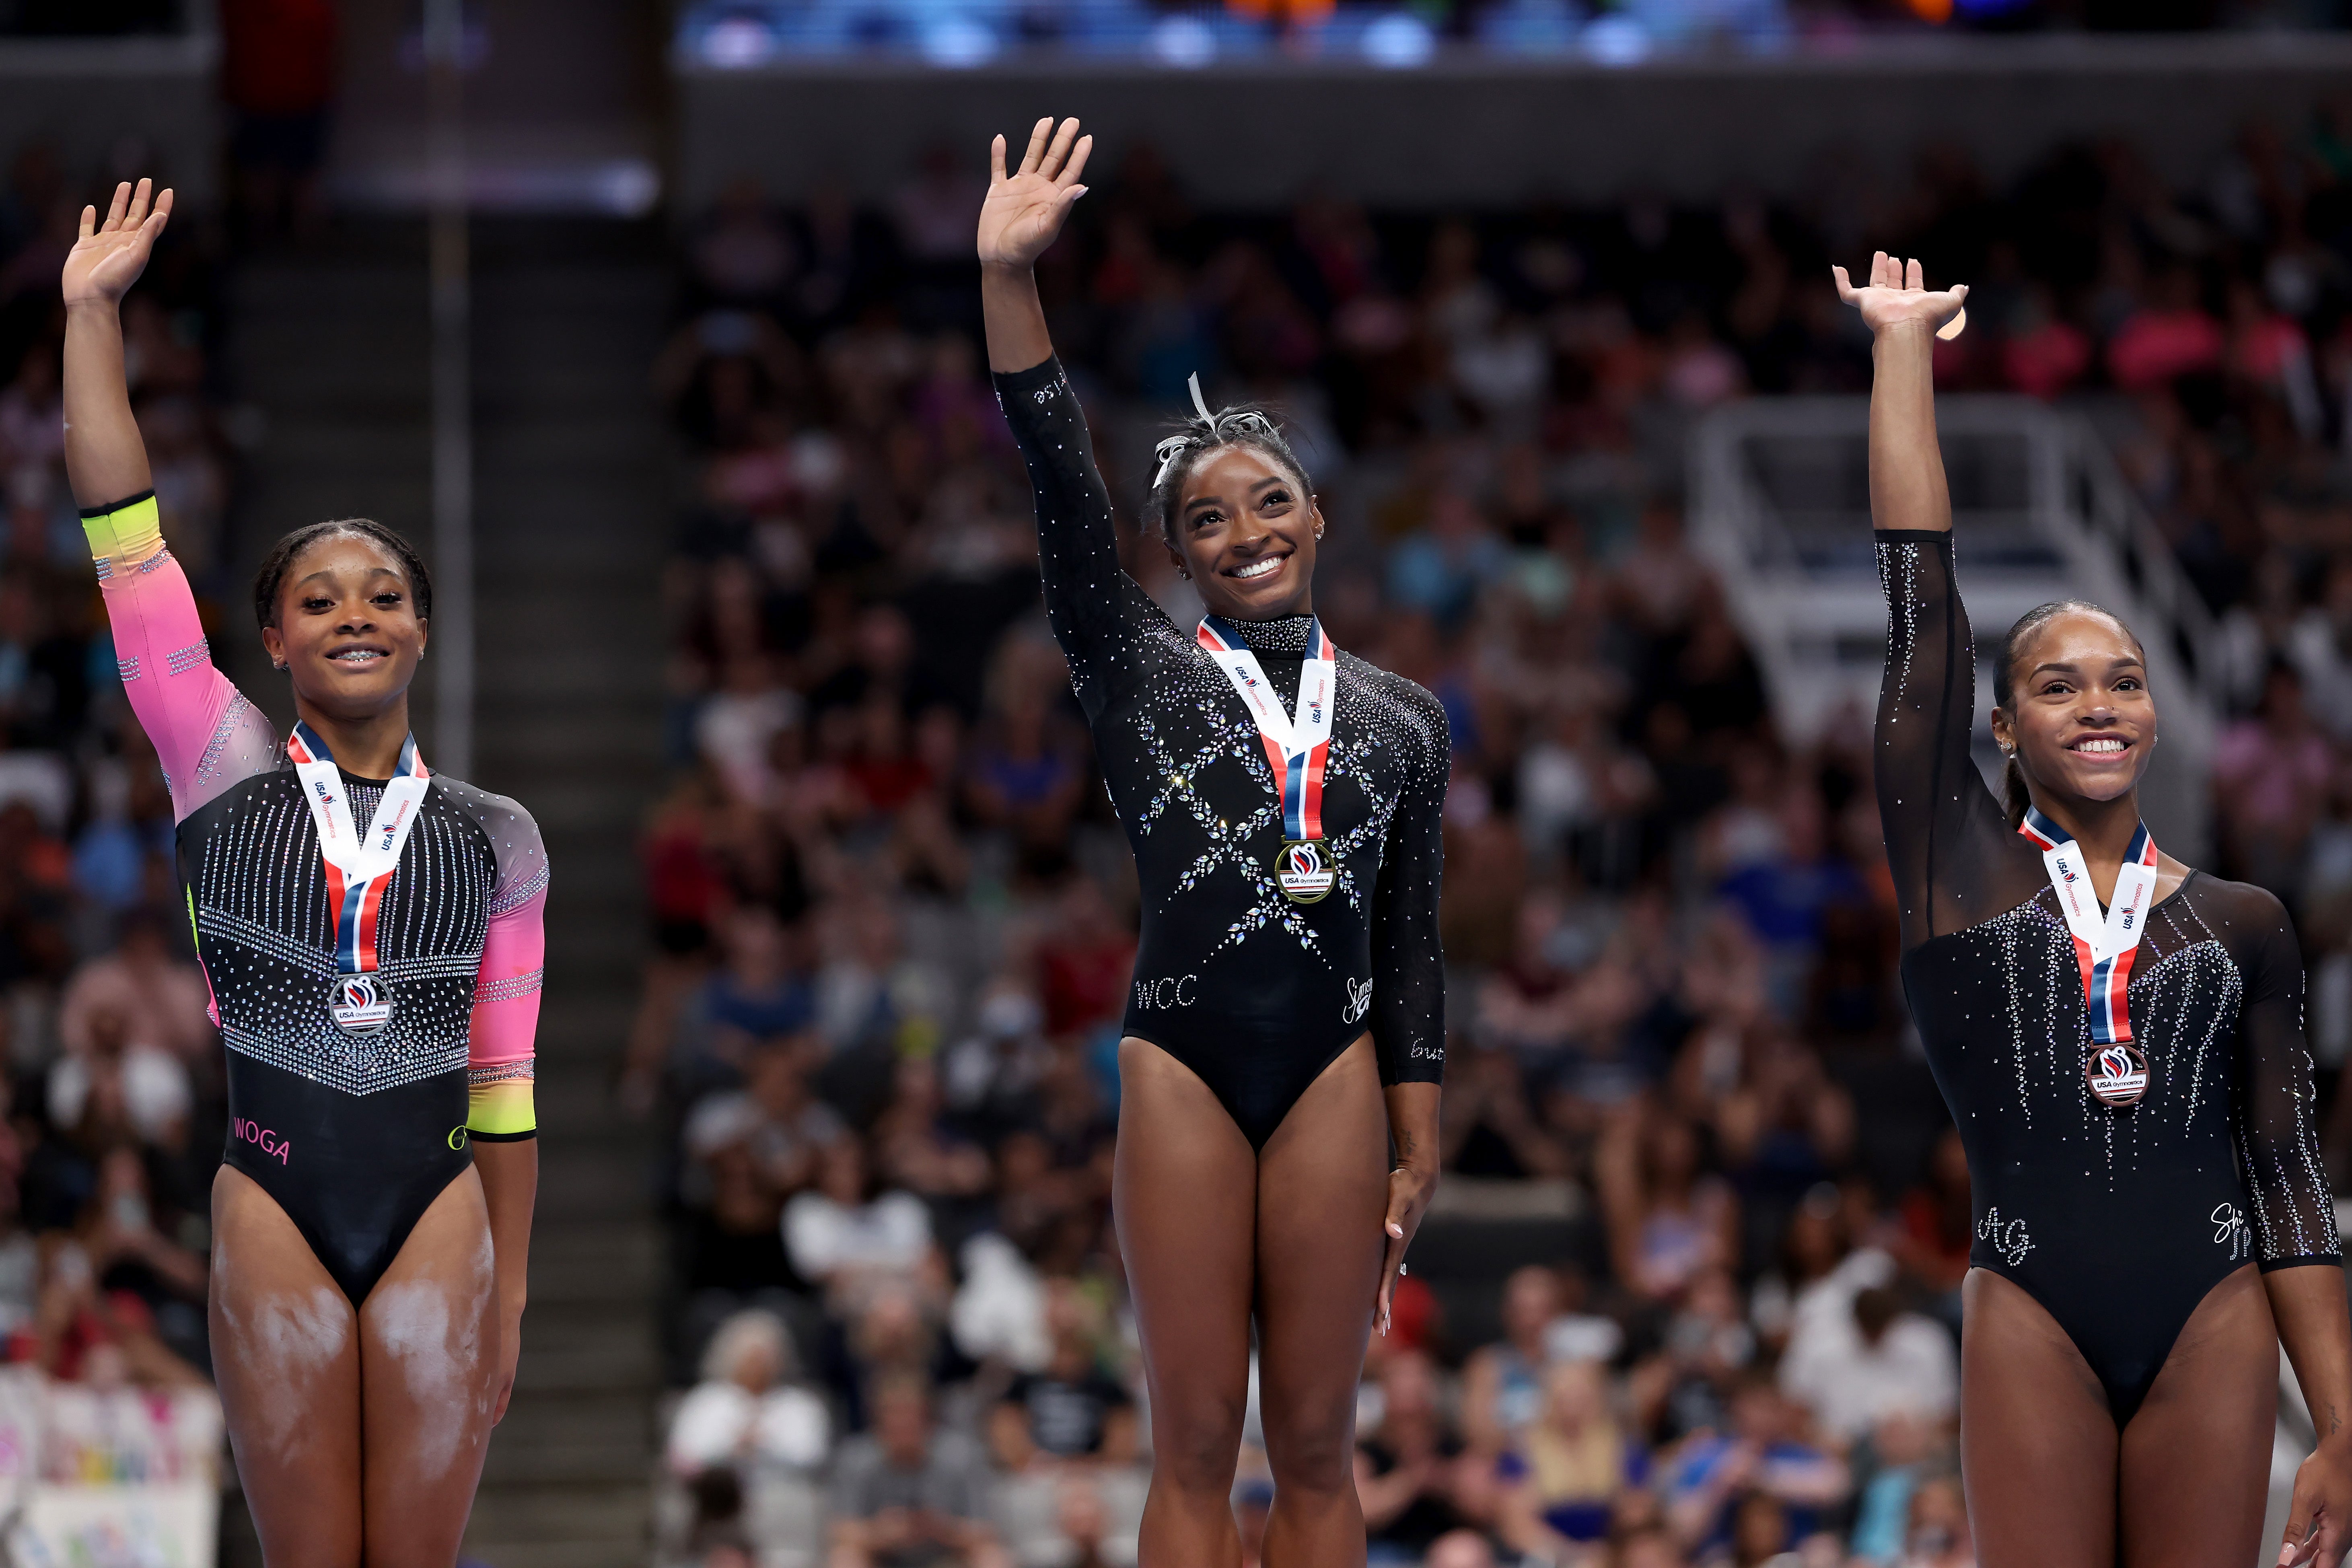 Many 'twisties' and turns, but Simone Biles exits Games a champion